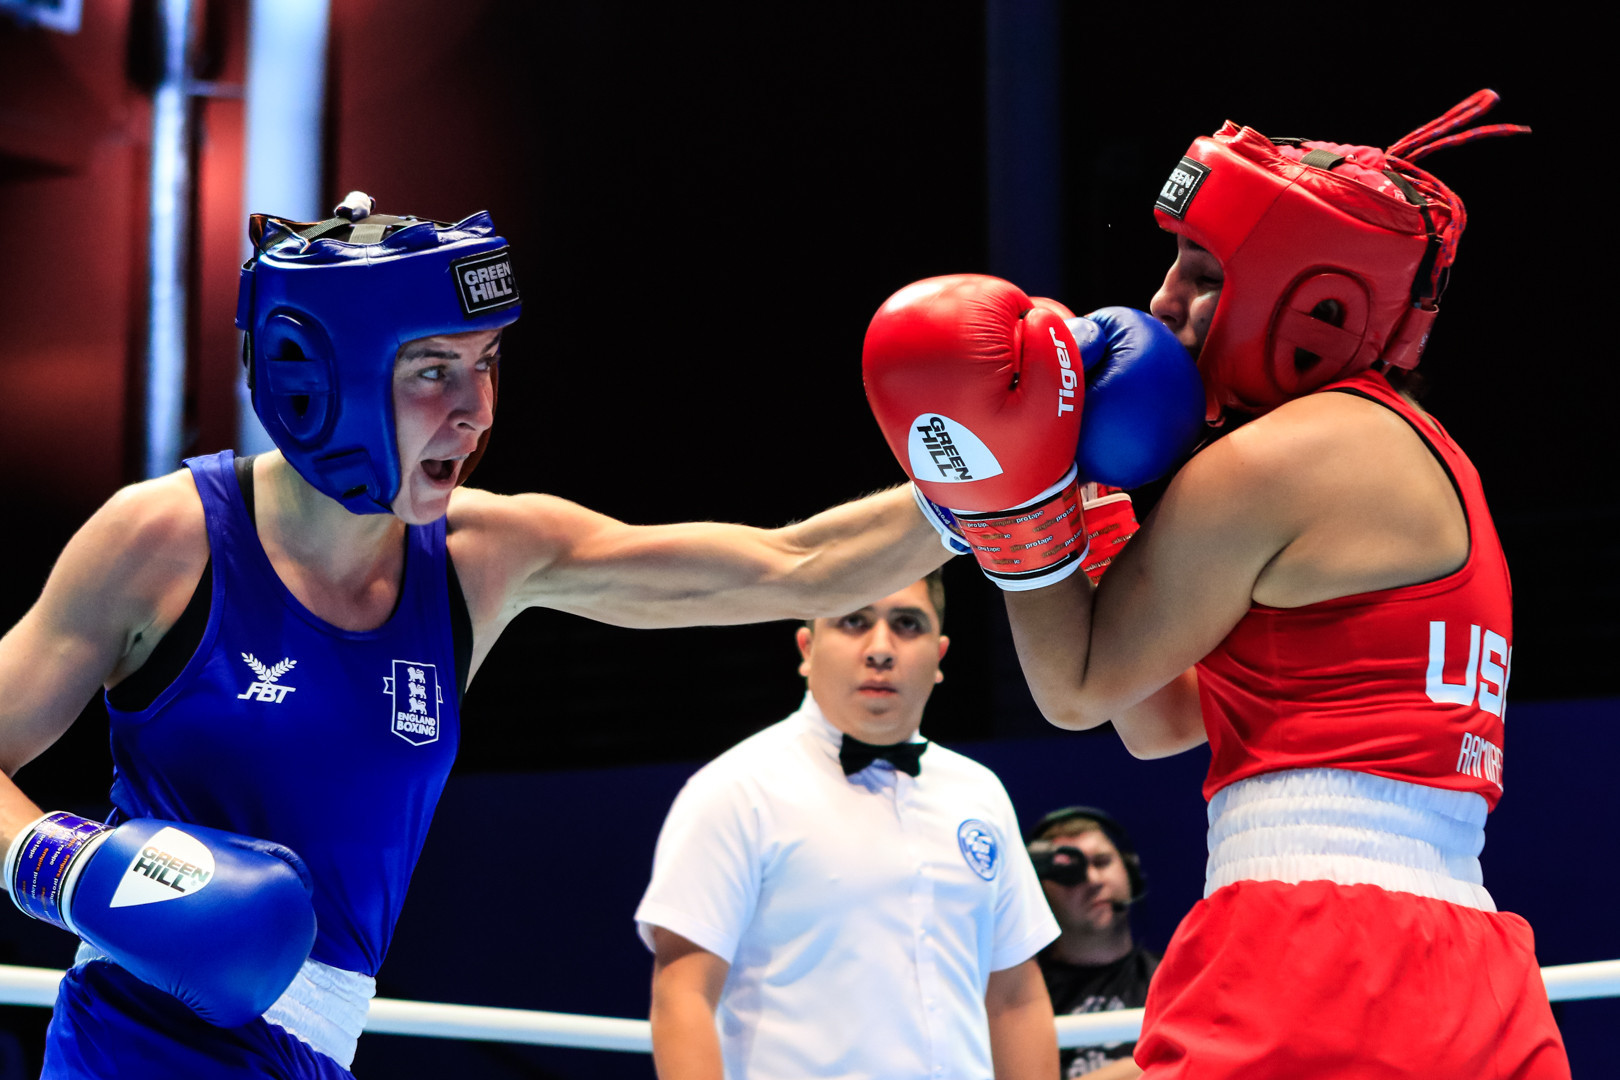 Karris Artingstall of England secured a 5-0 win over Yarisel Ramirez of the United States in the first featherweight bout of the competition ©Russian Boxing Federation